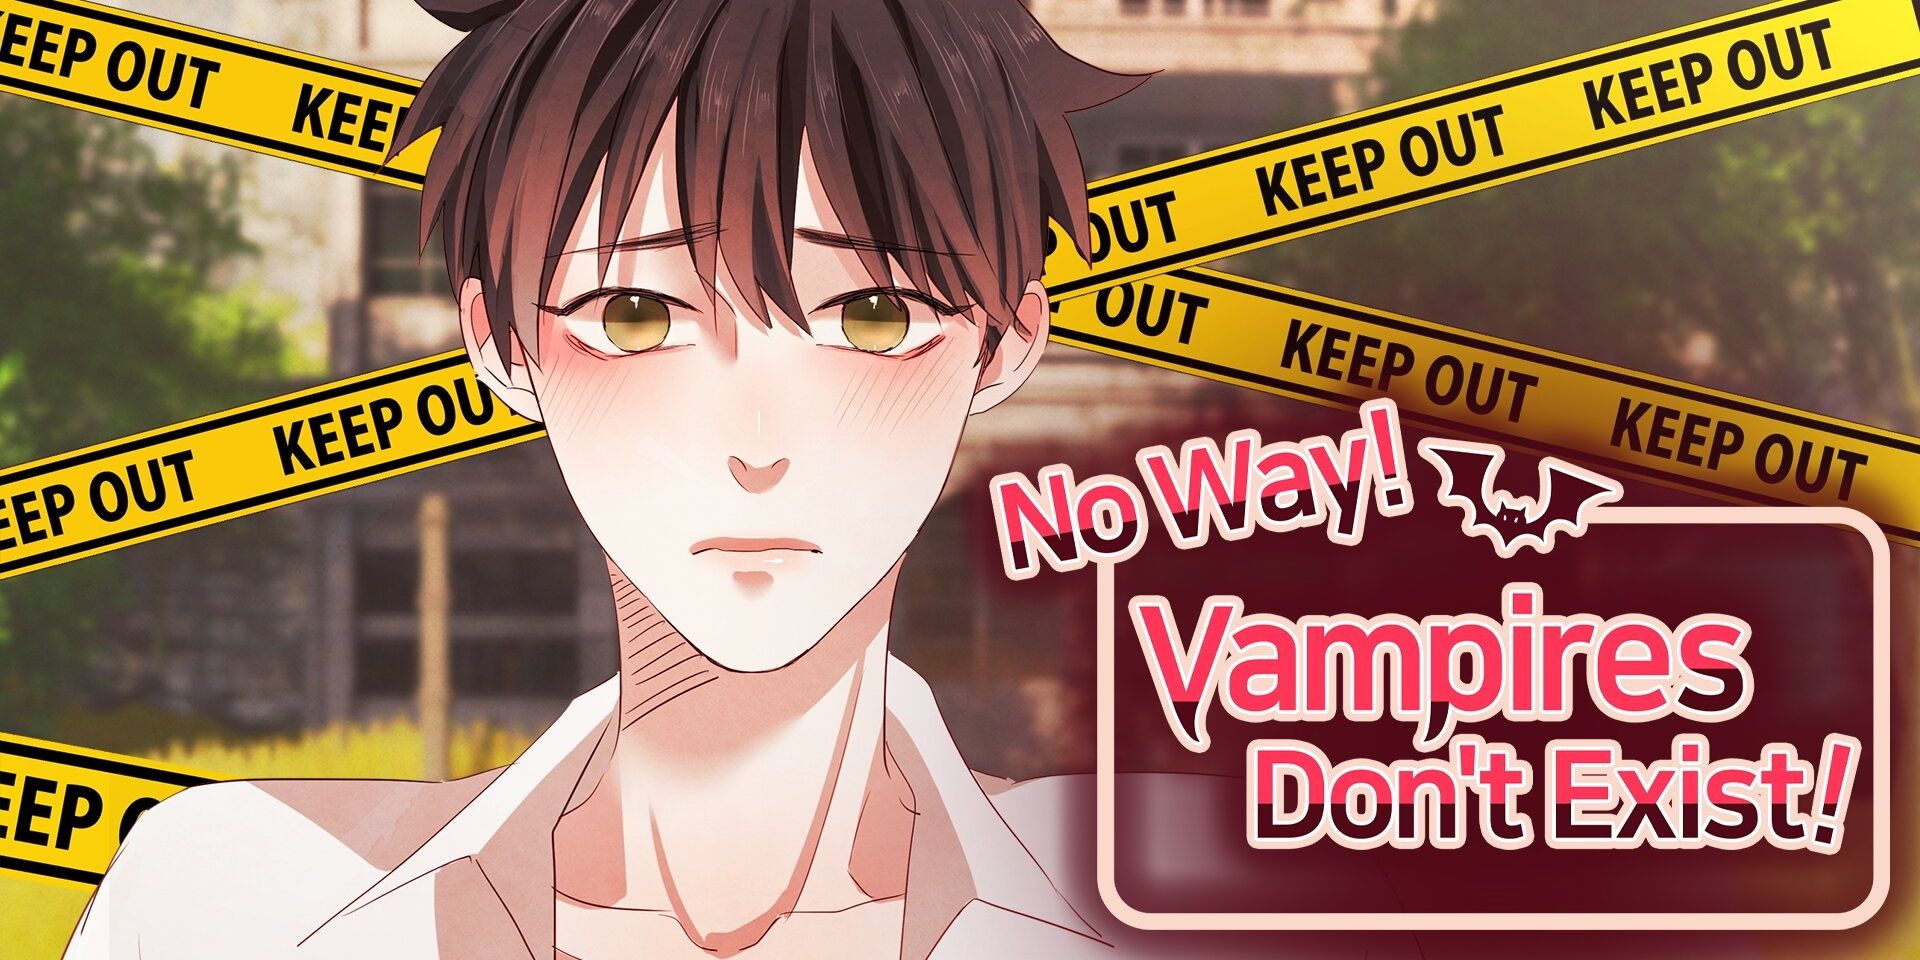 Donha from No Way Vampires Don't Exist looking concerned in promotional art